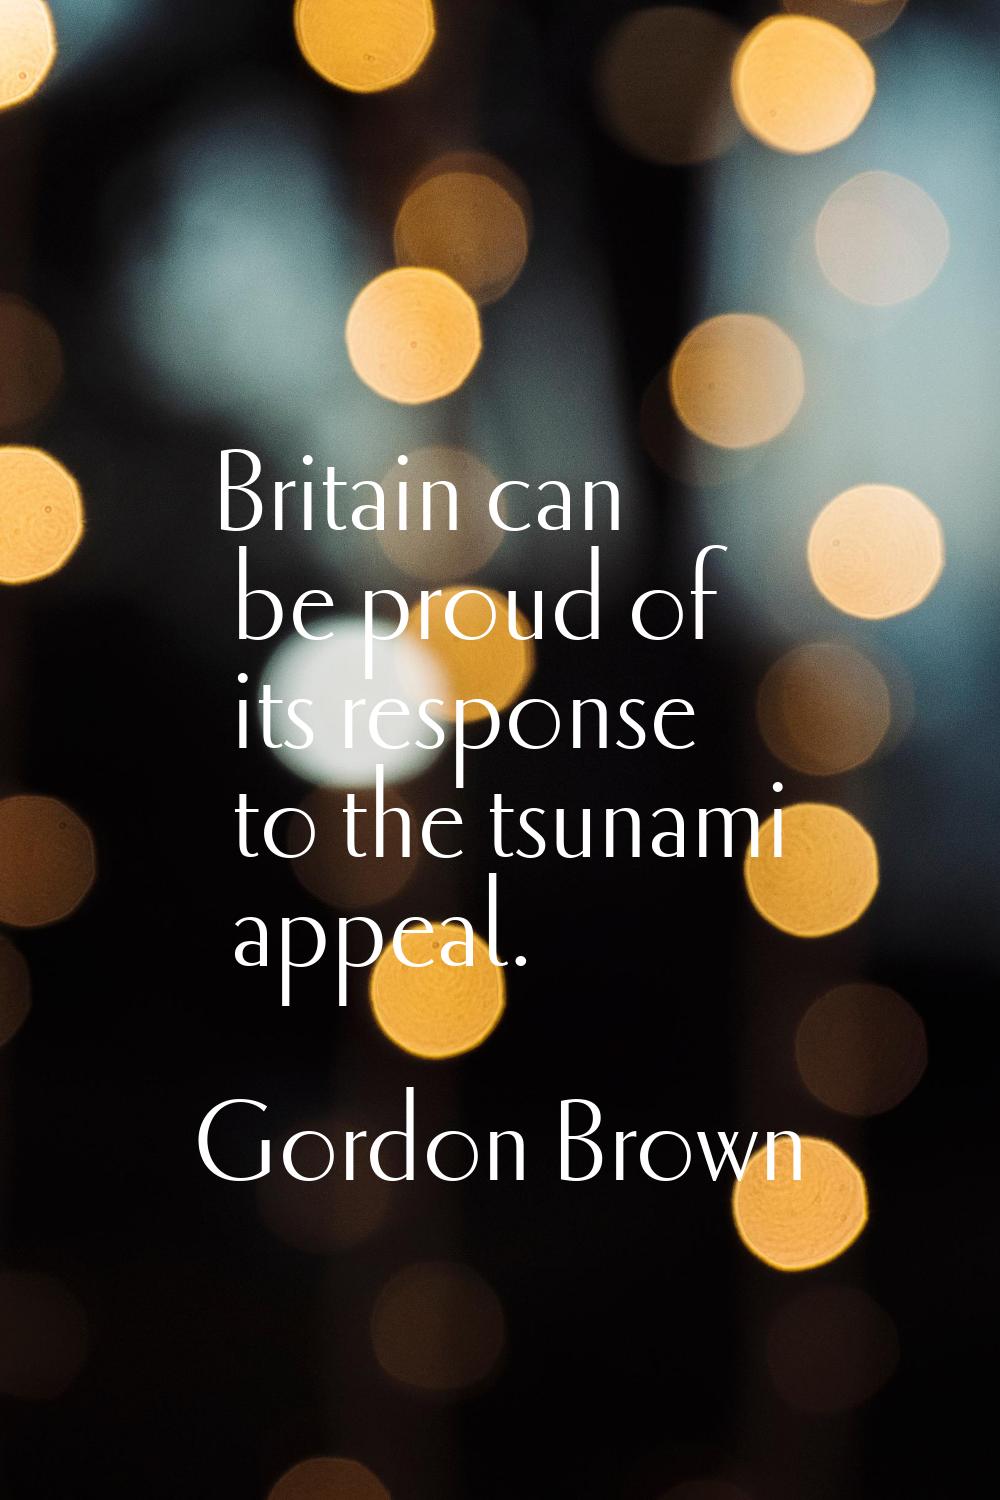 Britain can be proud of its response to the tsunami appeal.